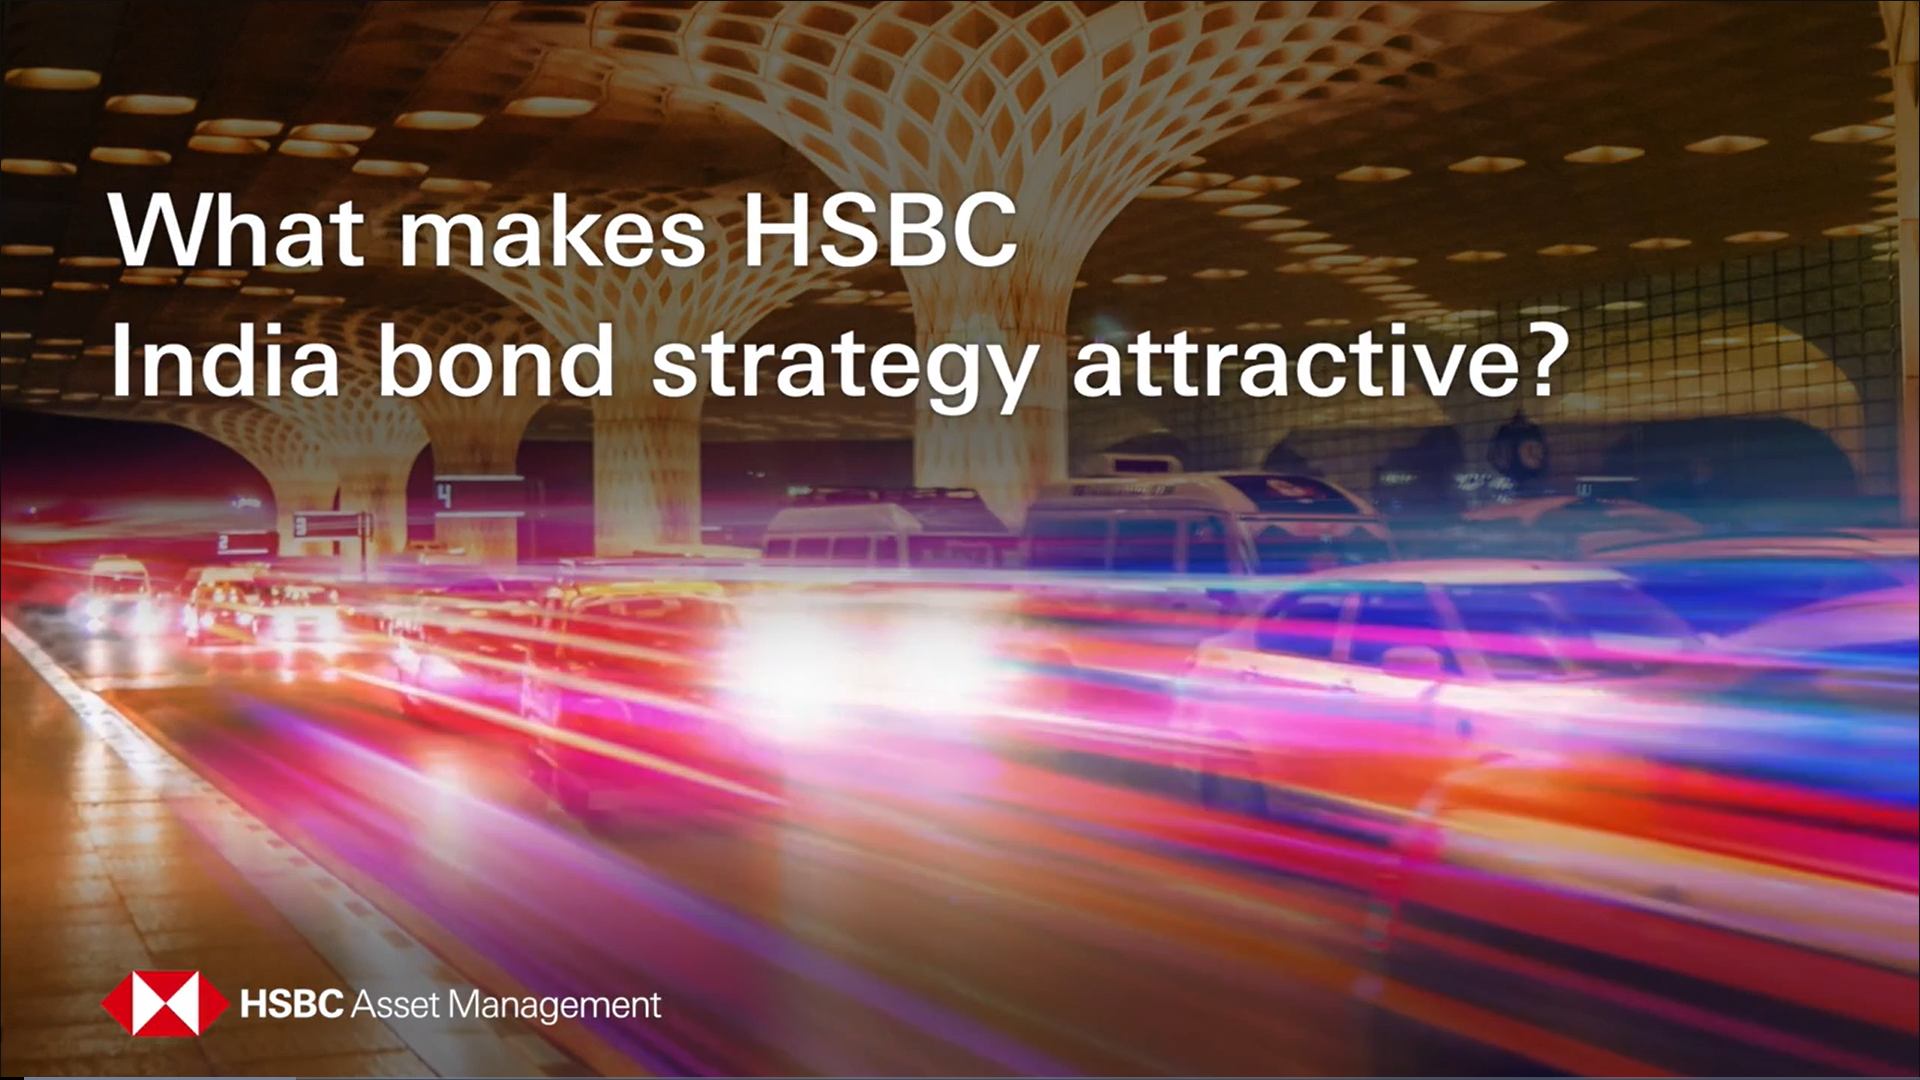 What makes HSBC India bond strategy attractive